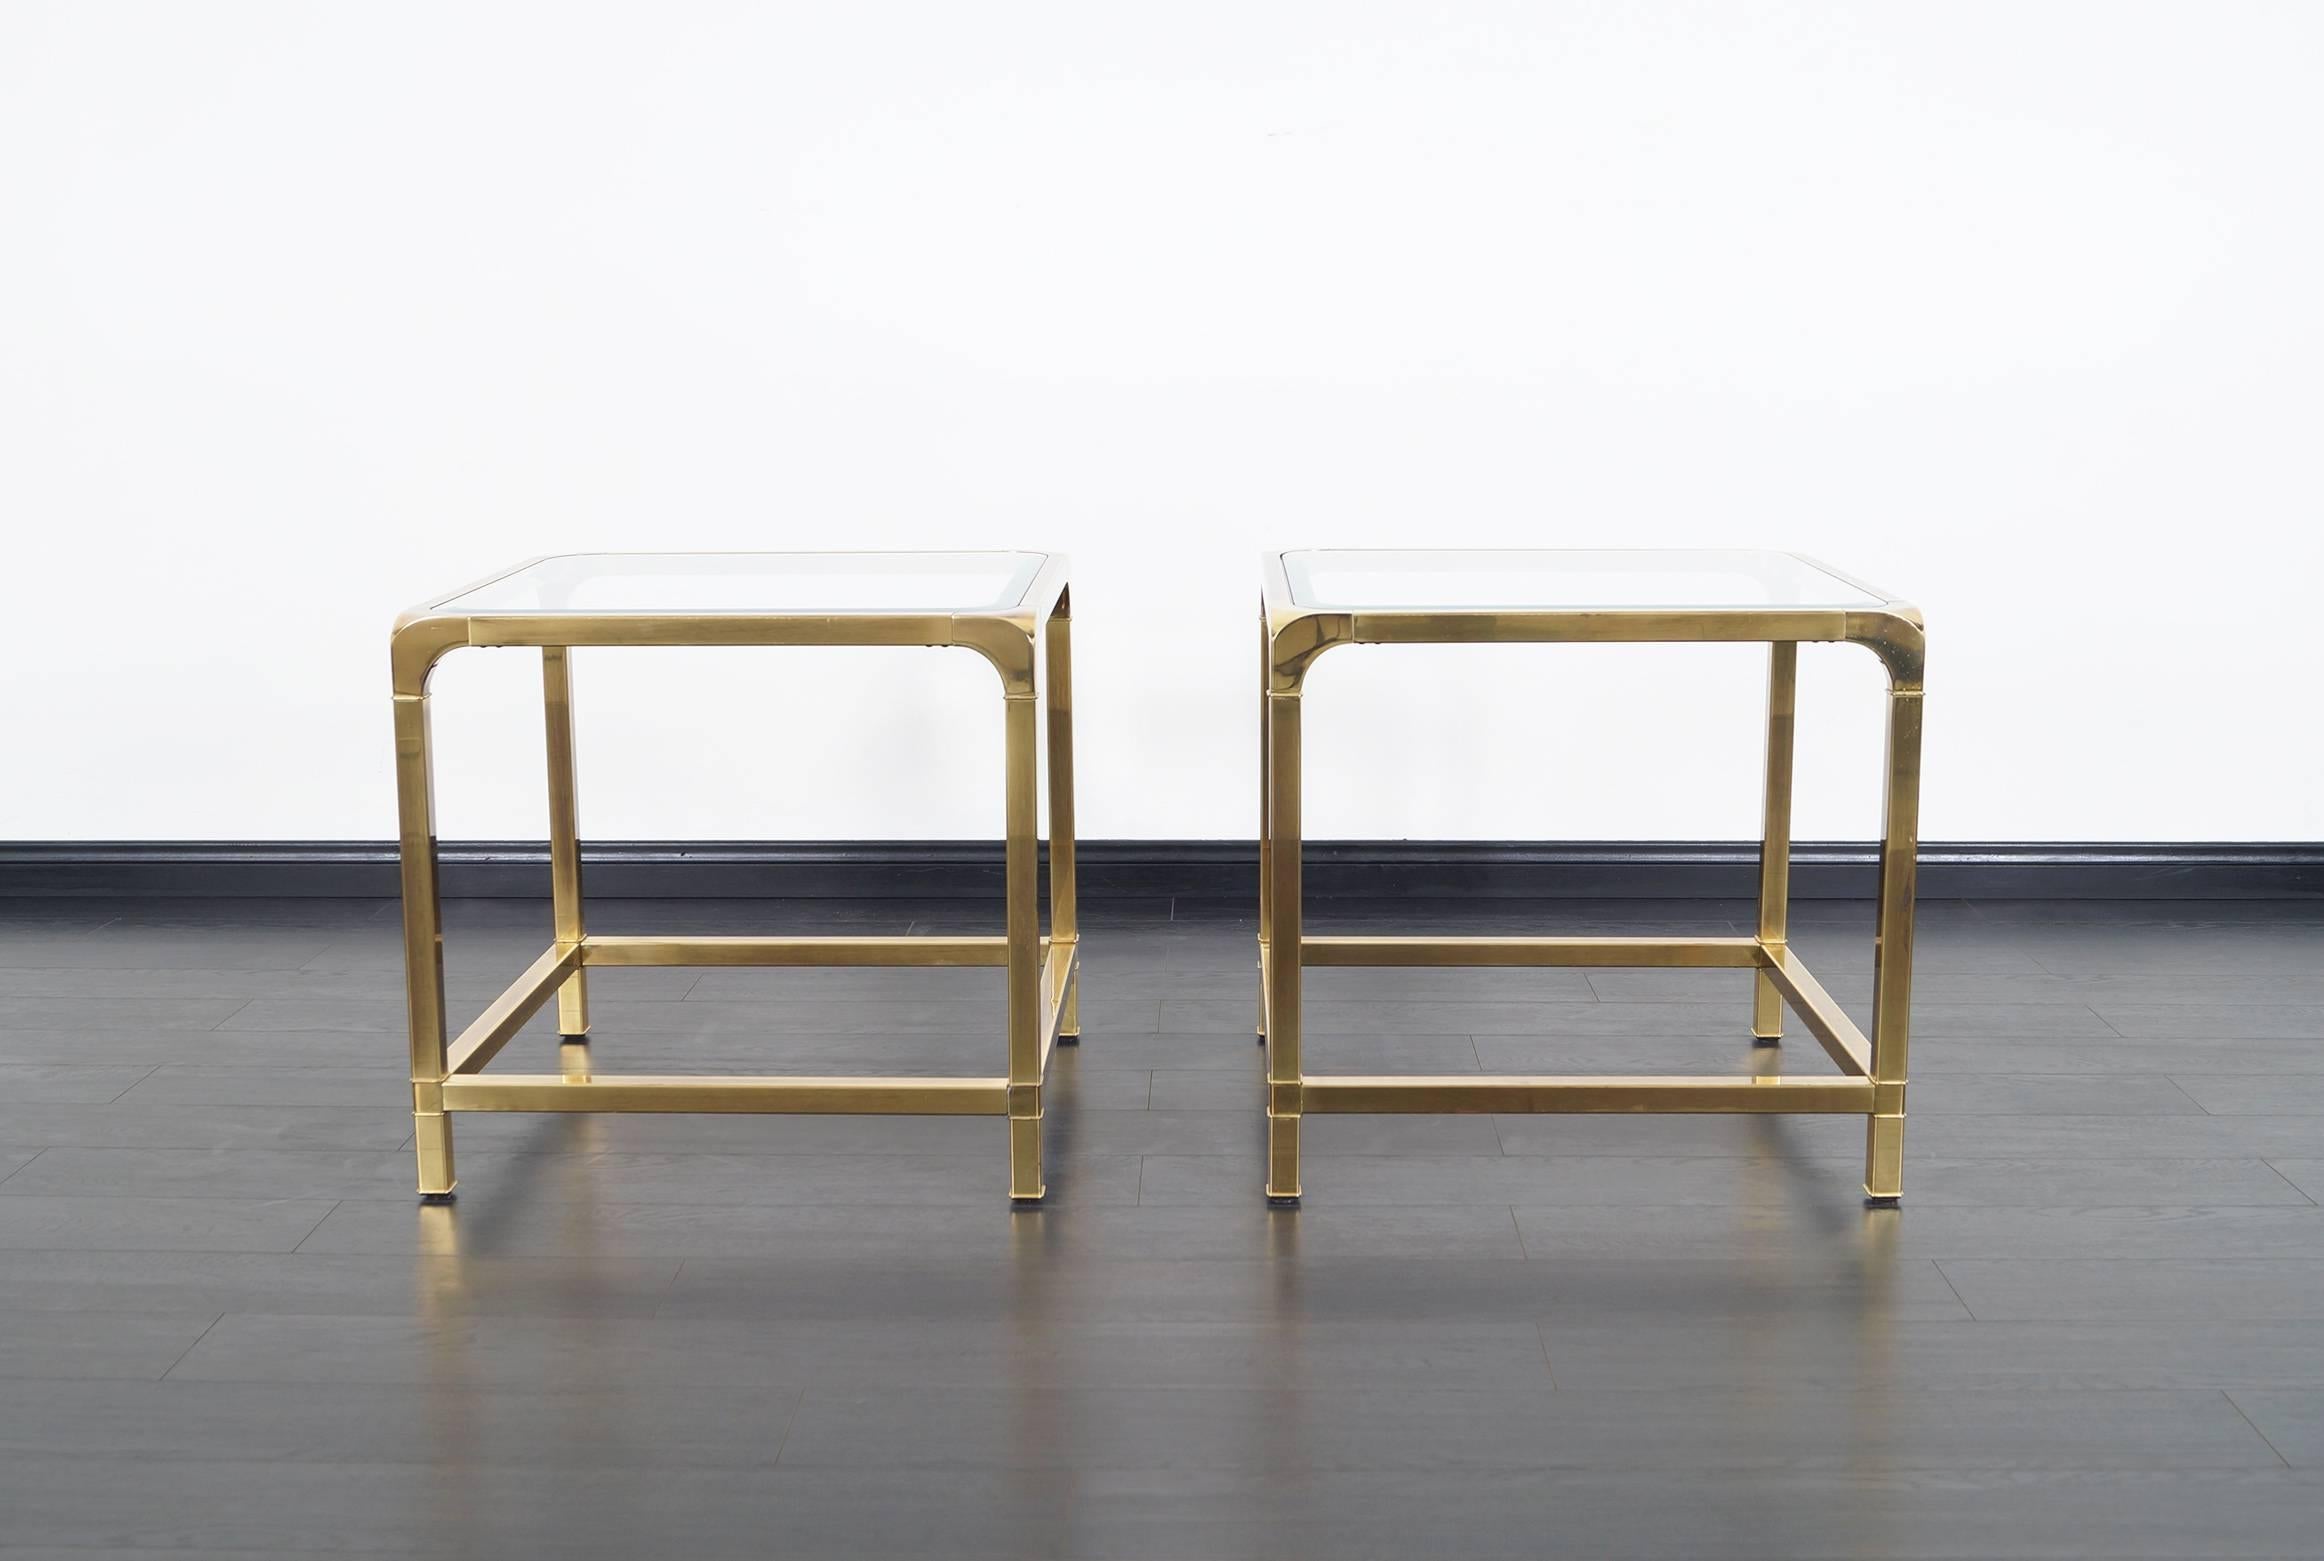 Fabulous pair of vintage brass side tables by Mastercraft.